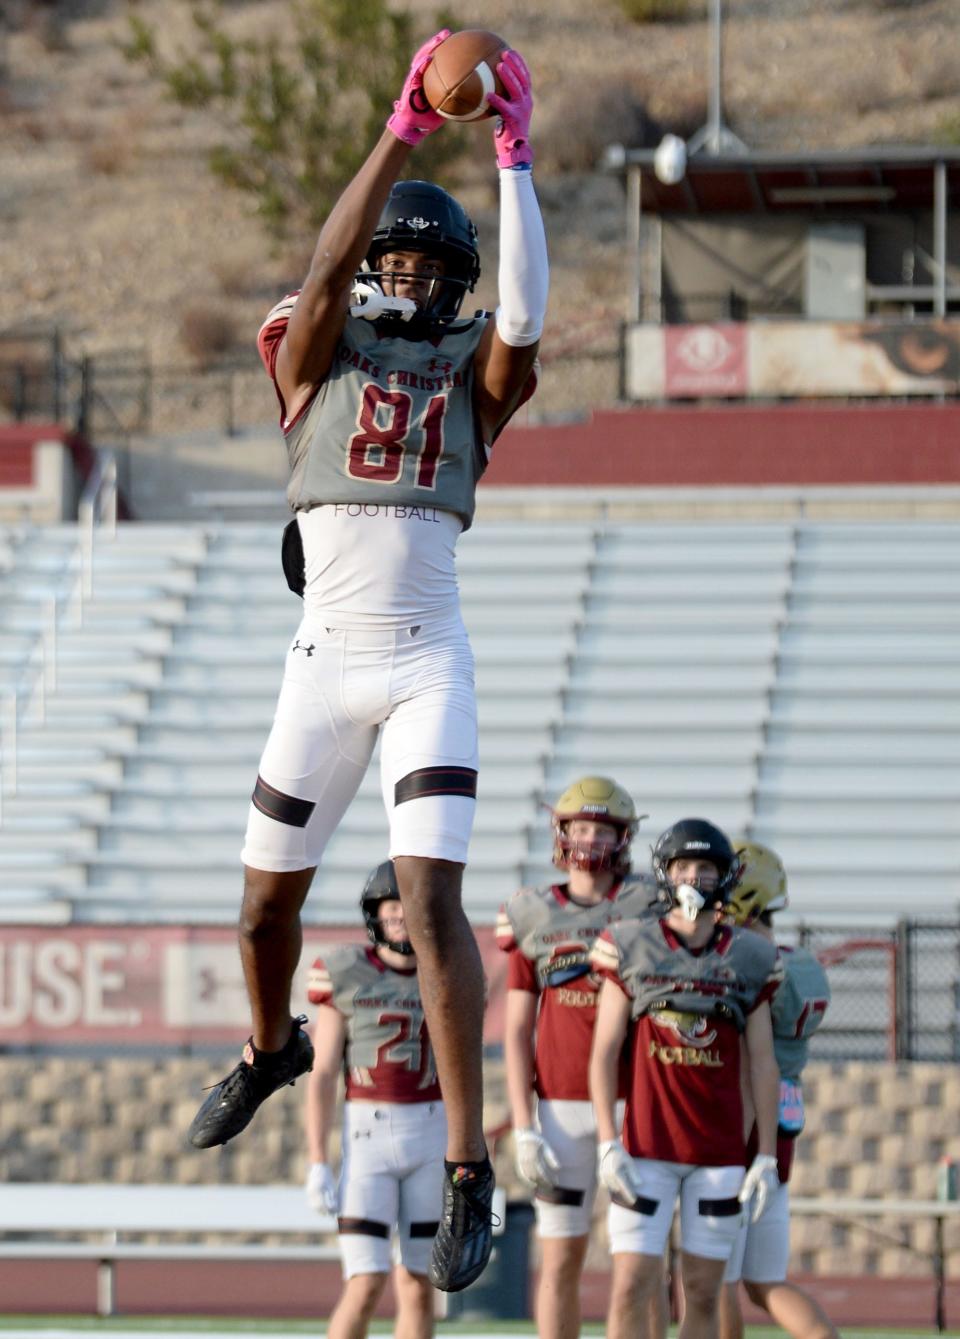 Wide receiver Justice Williams soars to make a catch during an Oaks Christian football team practice on Tuesday, Oct. 11, 2022. The Lions, who are 5-2 overall and 1-0 in the Marmonte League, host rival Westlake on Friday night.